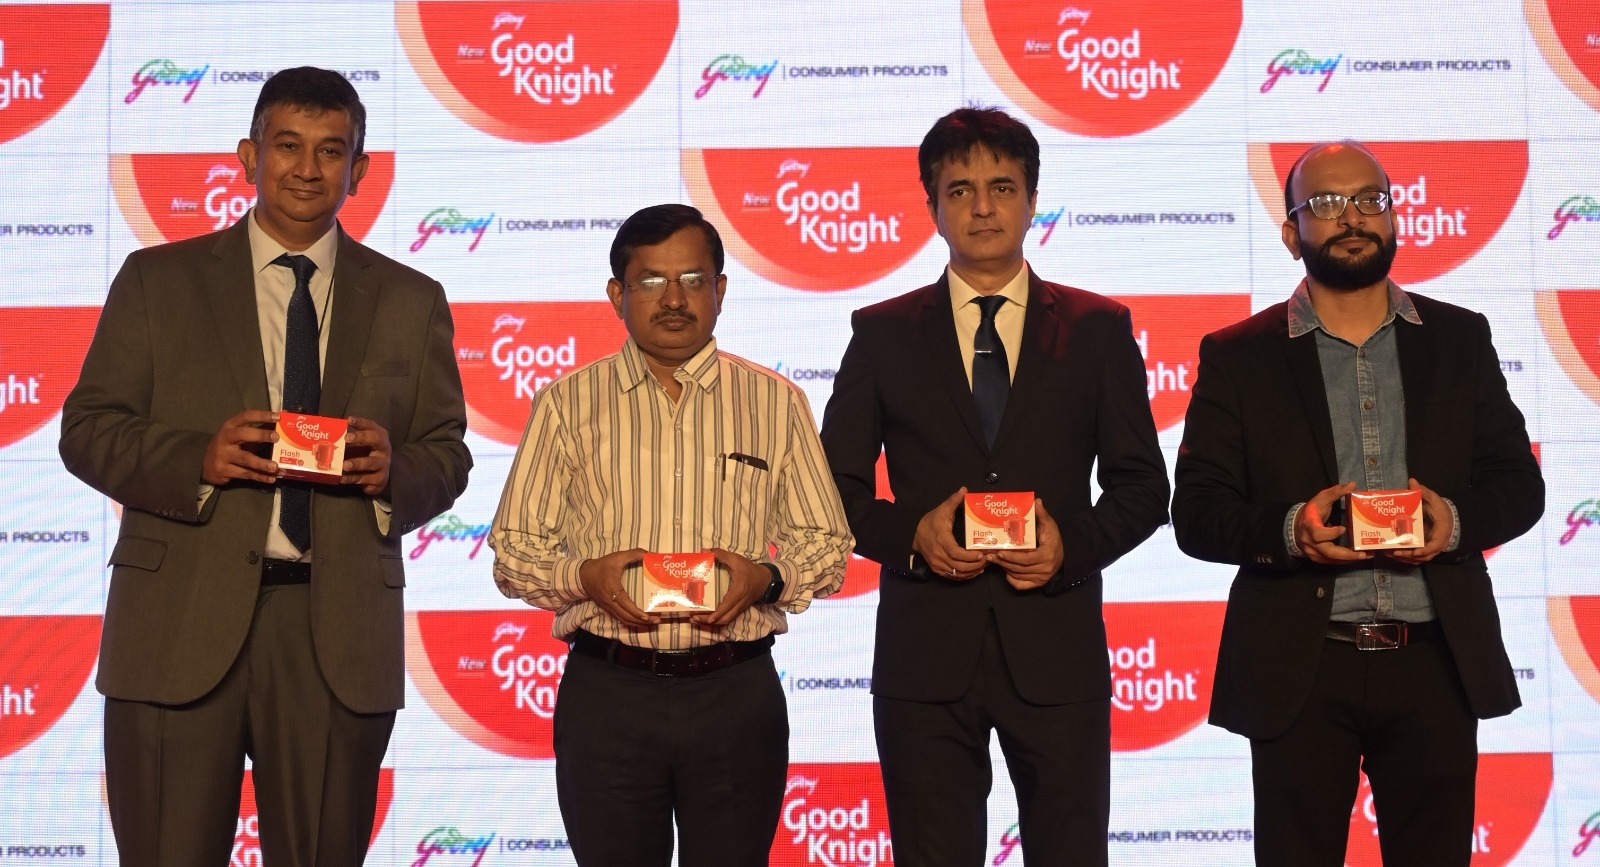 Godrej Consumer Products introduces patented India’s first indigenously developed mosquito repellent molecule in Goodknight liquid vapouriser